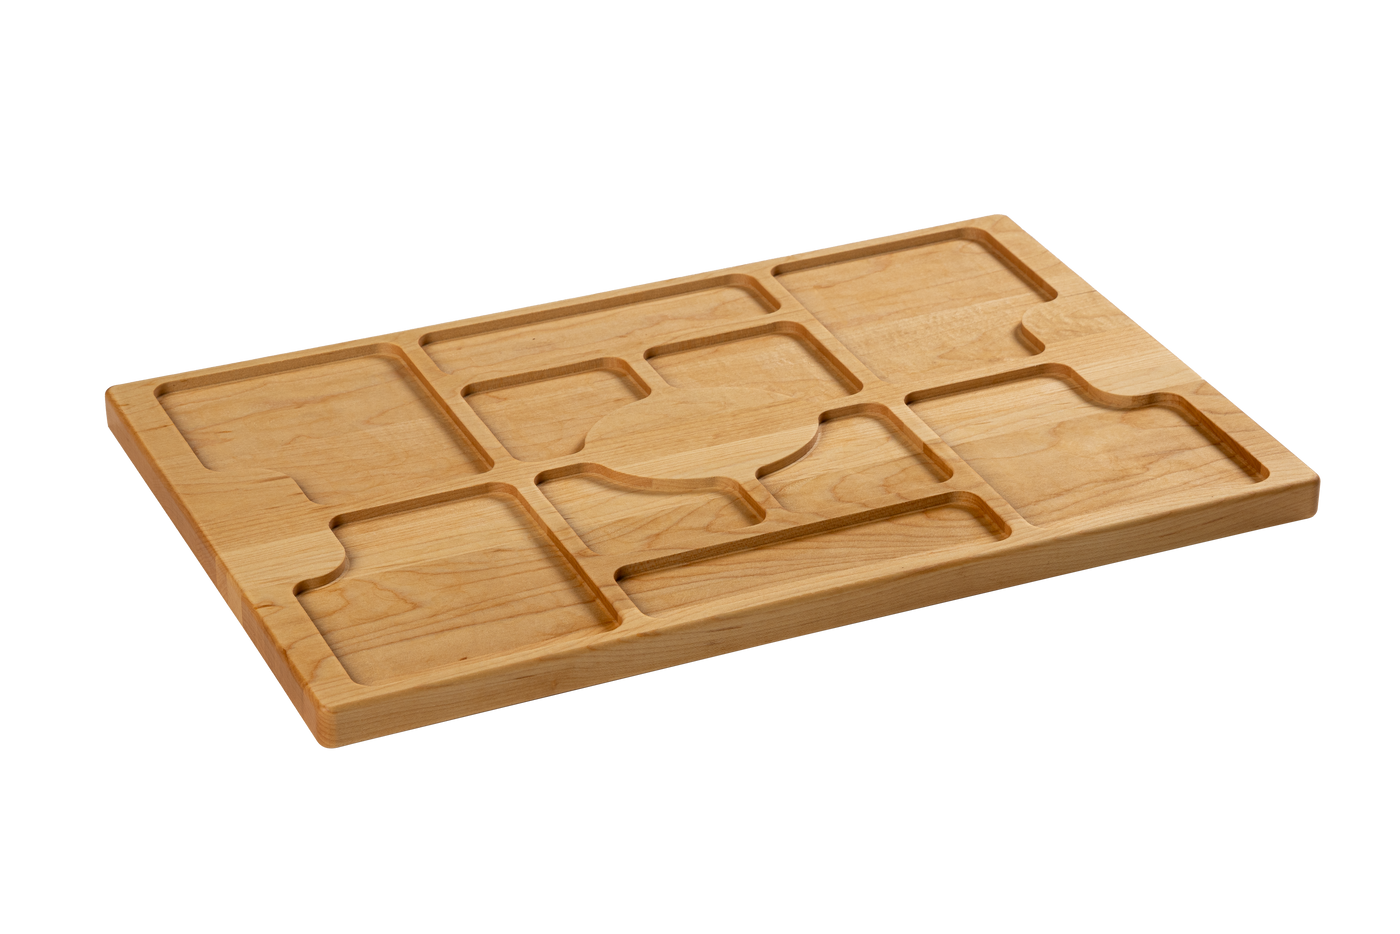 Maple - CHA17 - Charcuterie Board with Compartments 17"x11"x3/4"